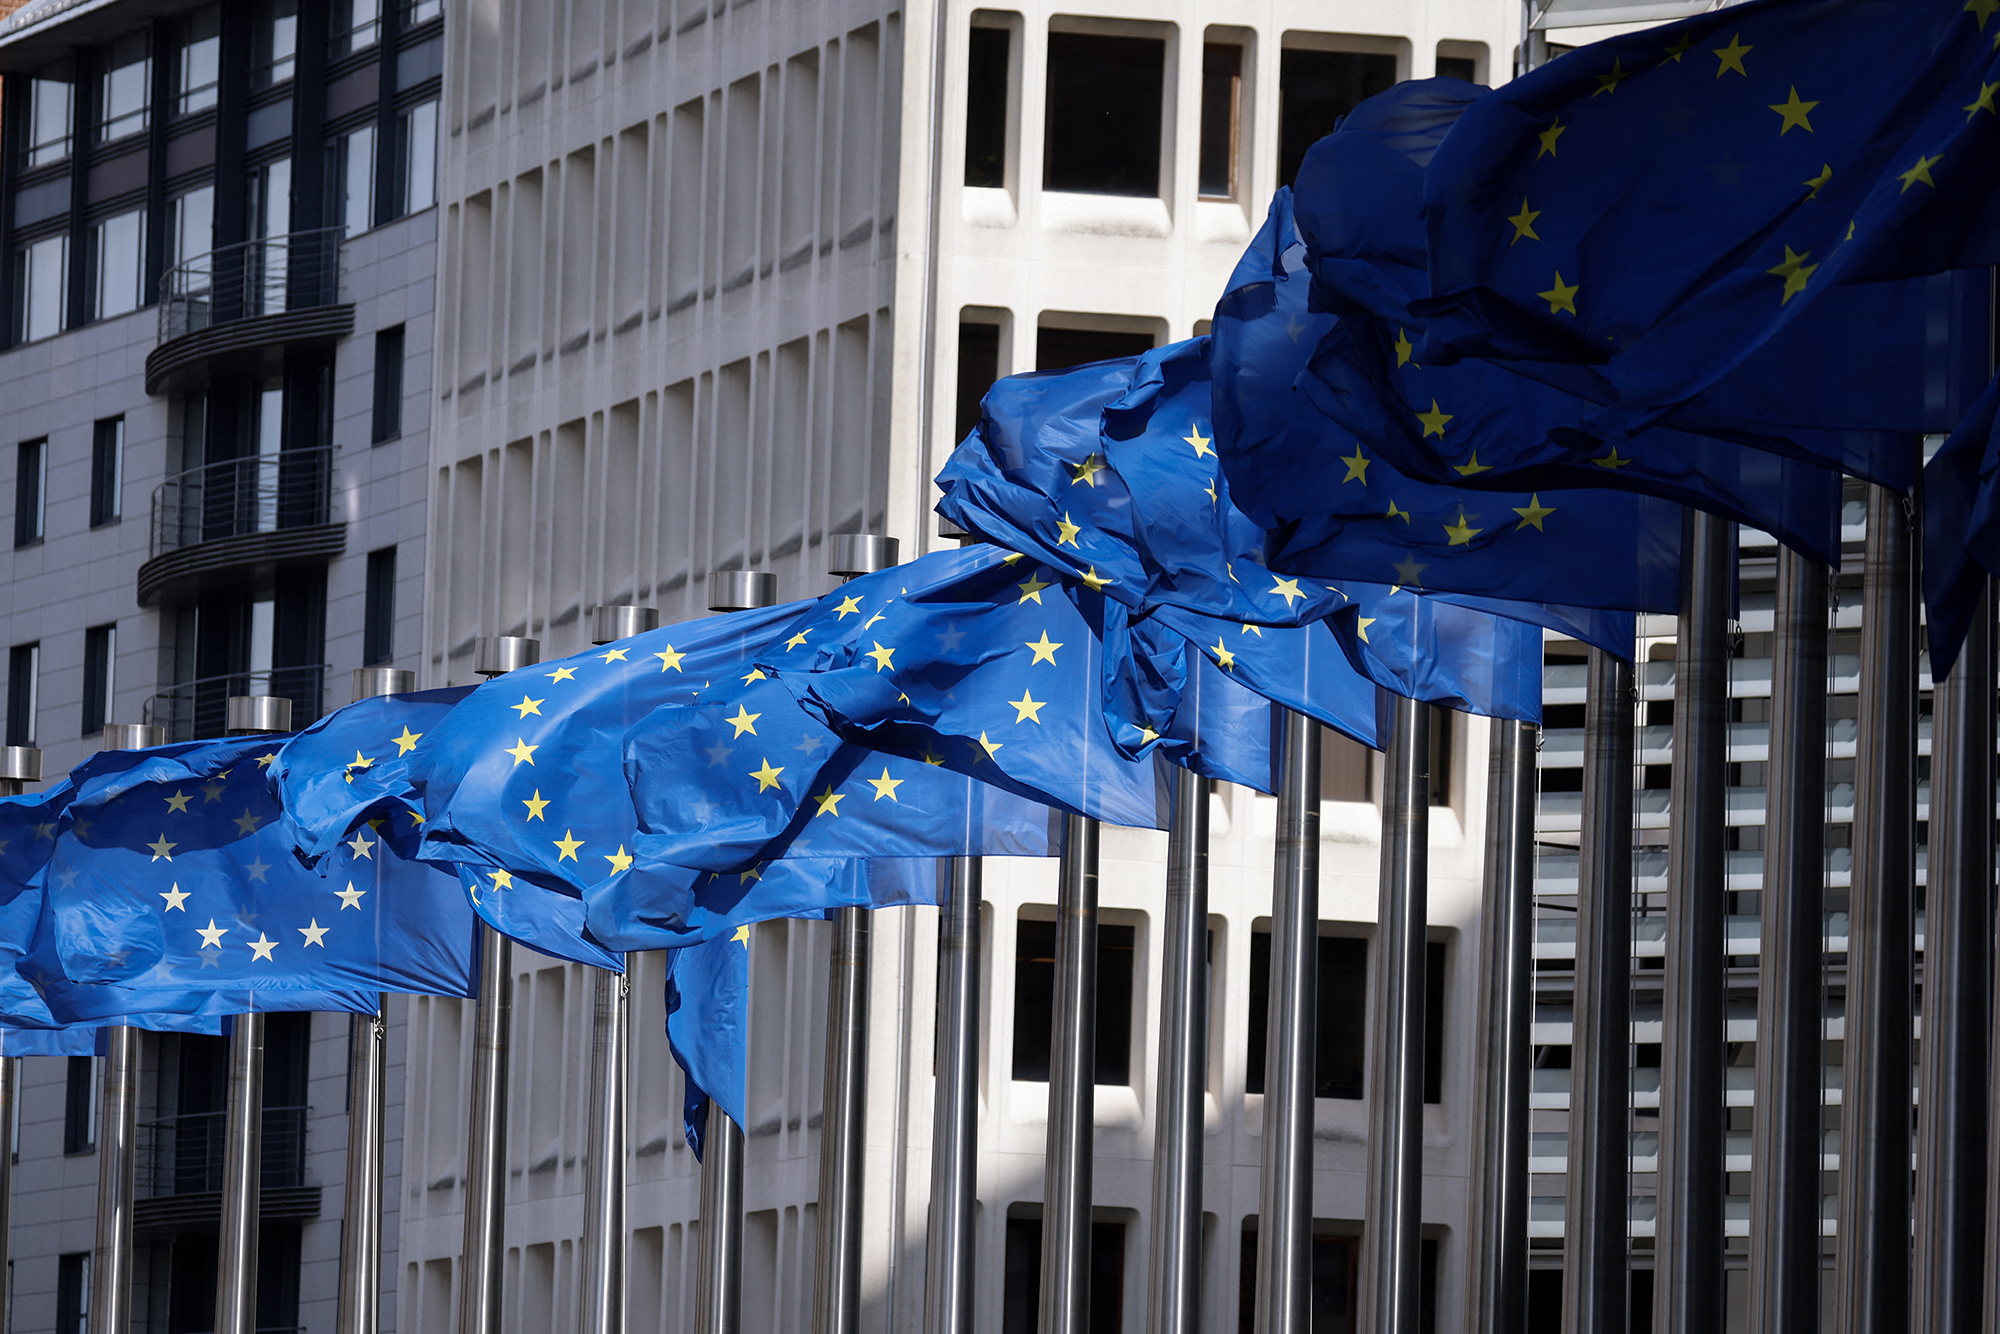 European Union flags fly outside the European Commission building in Brussels, Belgium, on April 12.